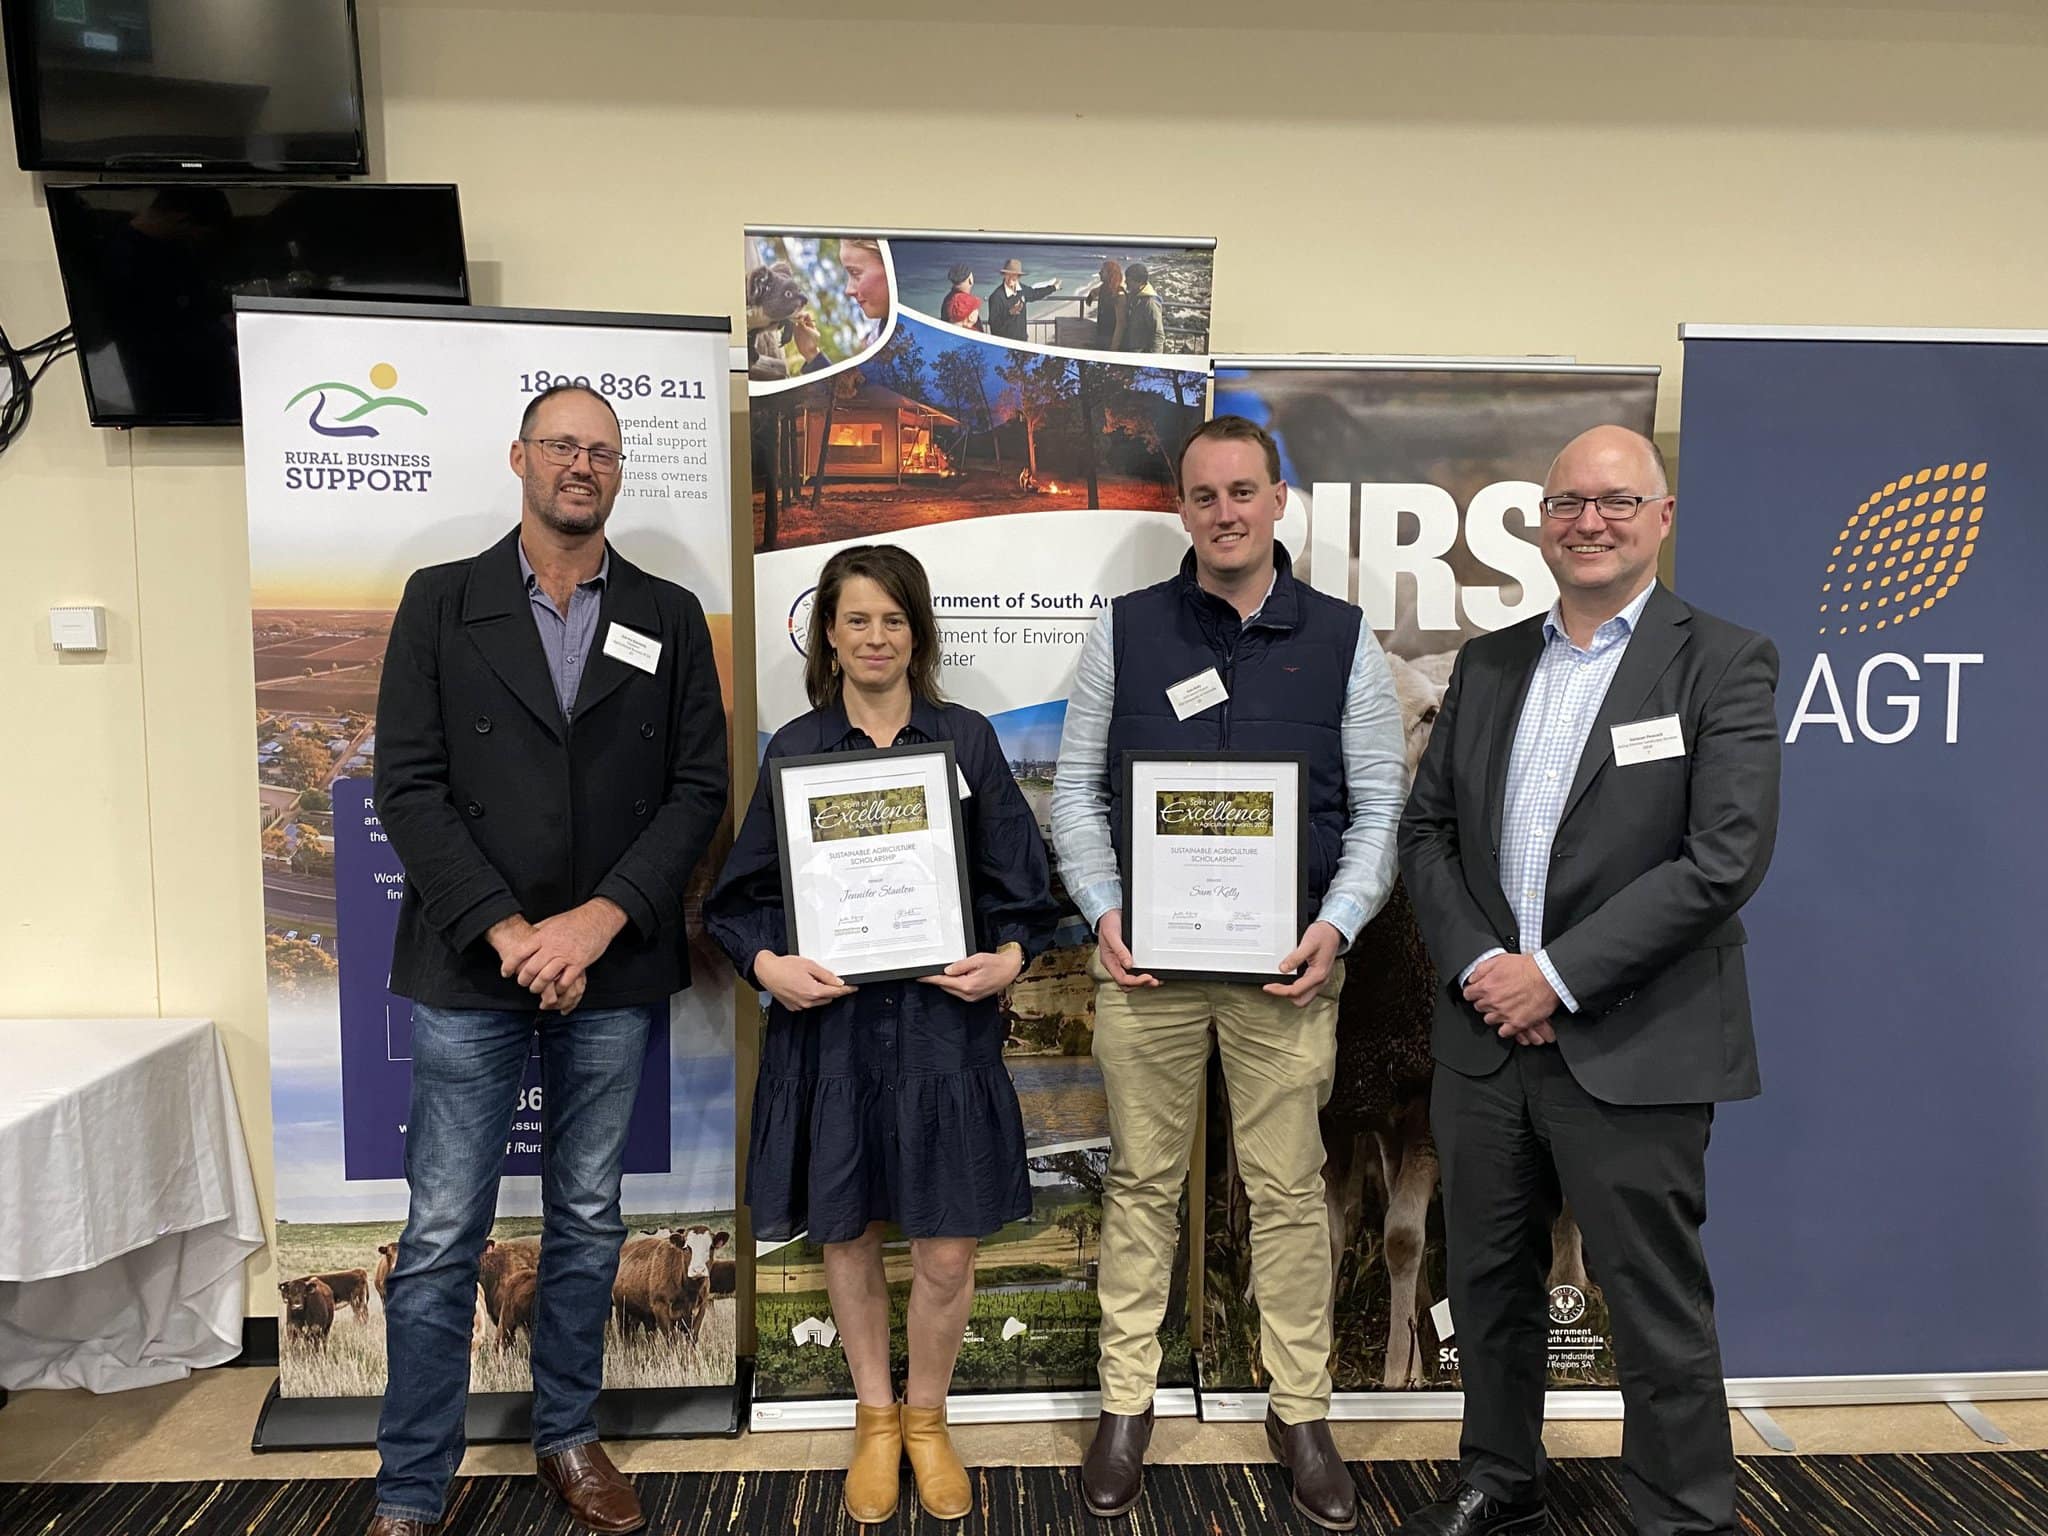 (L-R) Darren Kennedy, Treasurer and Board Member of The Agricultural Bureau of South Australia, Sustainable Agriculture Scholarship finalists Jenny Stanton and Sam Kelly, Saravan Peacock, Acting Director Landscape Services, for the Department of Environment and Water